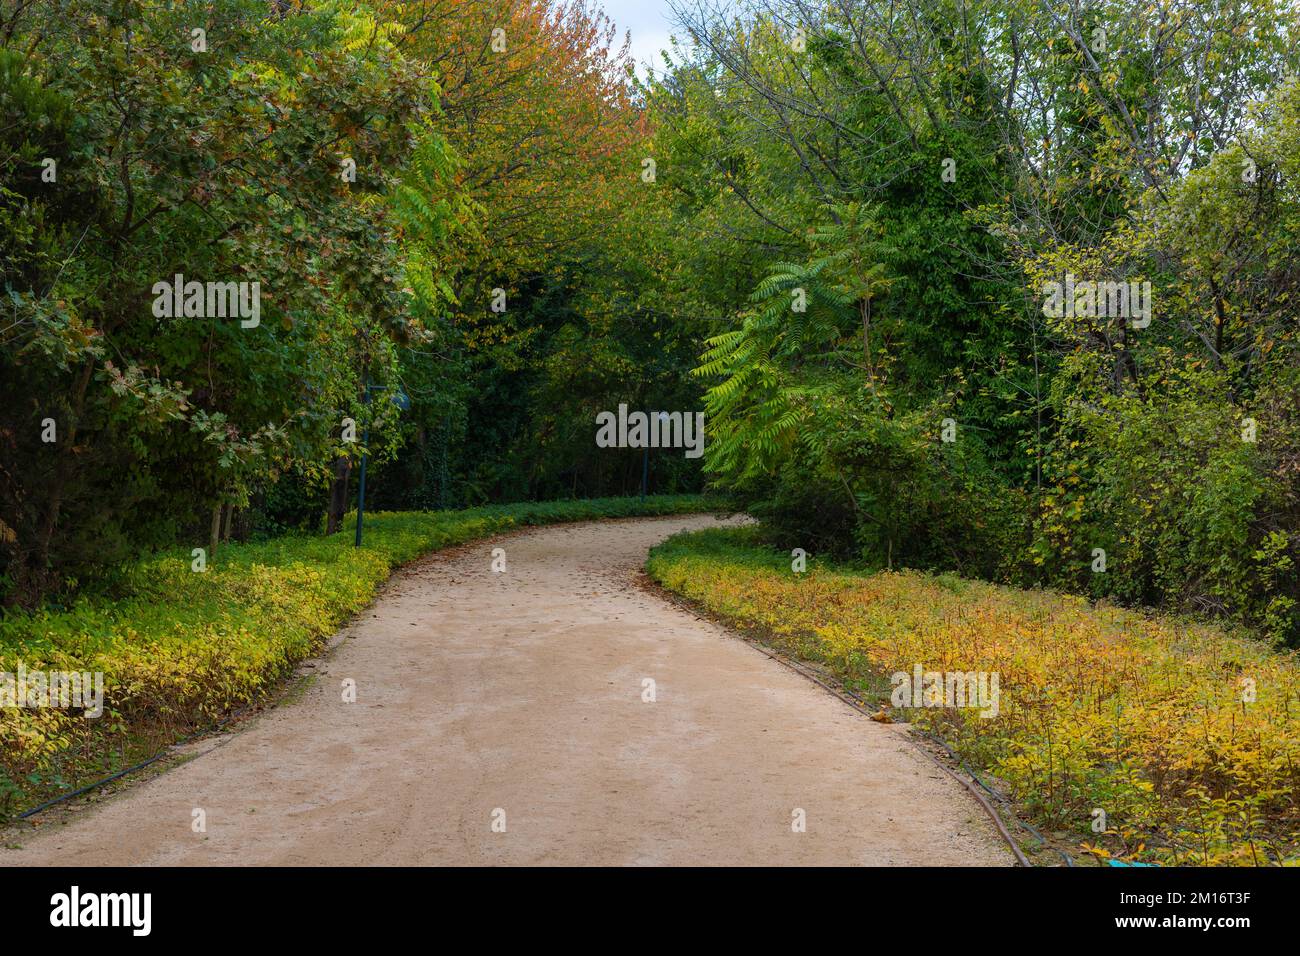 Ataturk City Forest in Sariyer Istanbul. Jogging trail in the forest. Healthy lifestyle background photo. Stock Photo